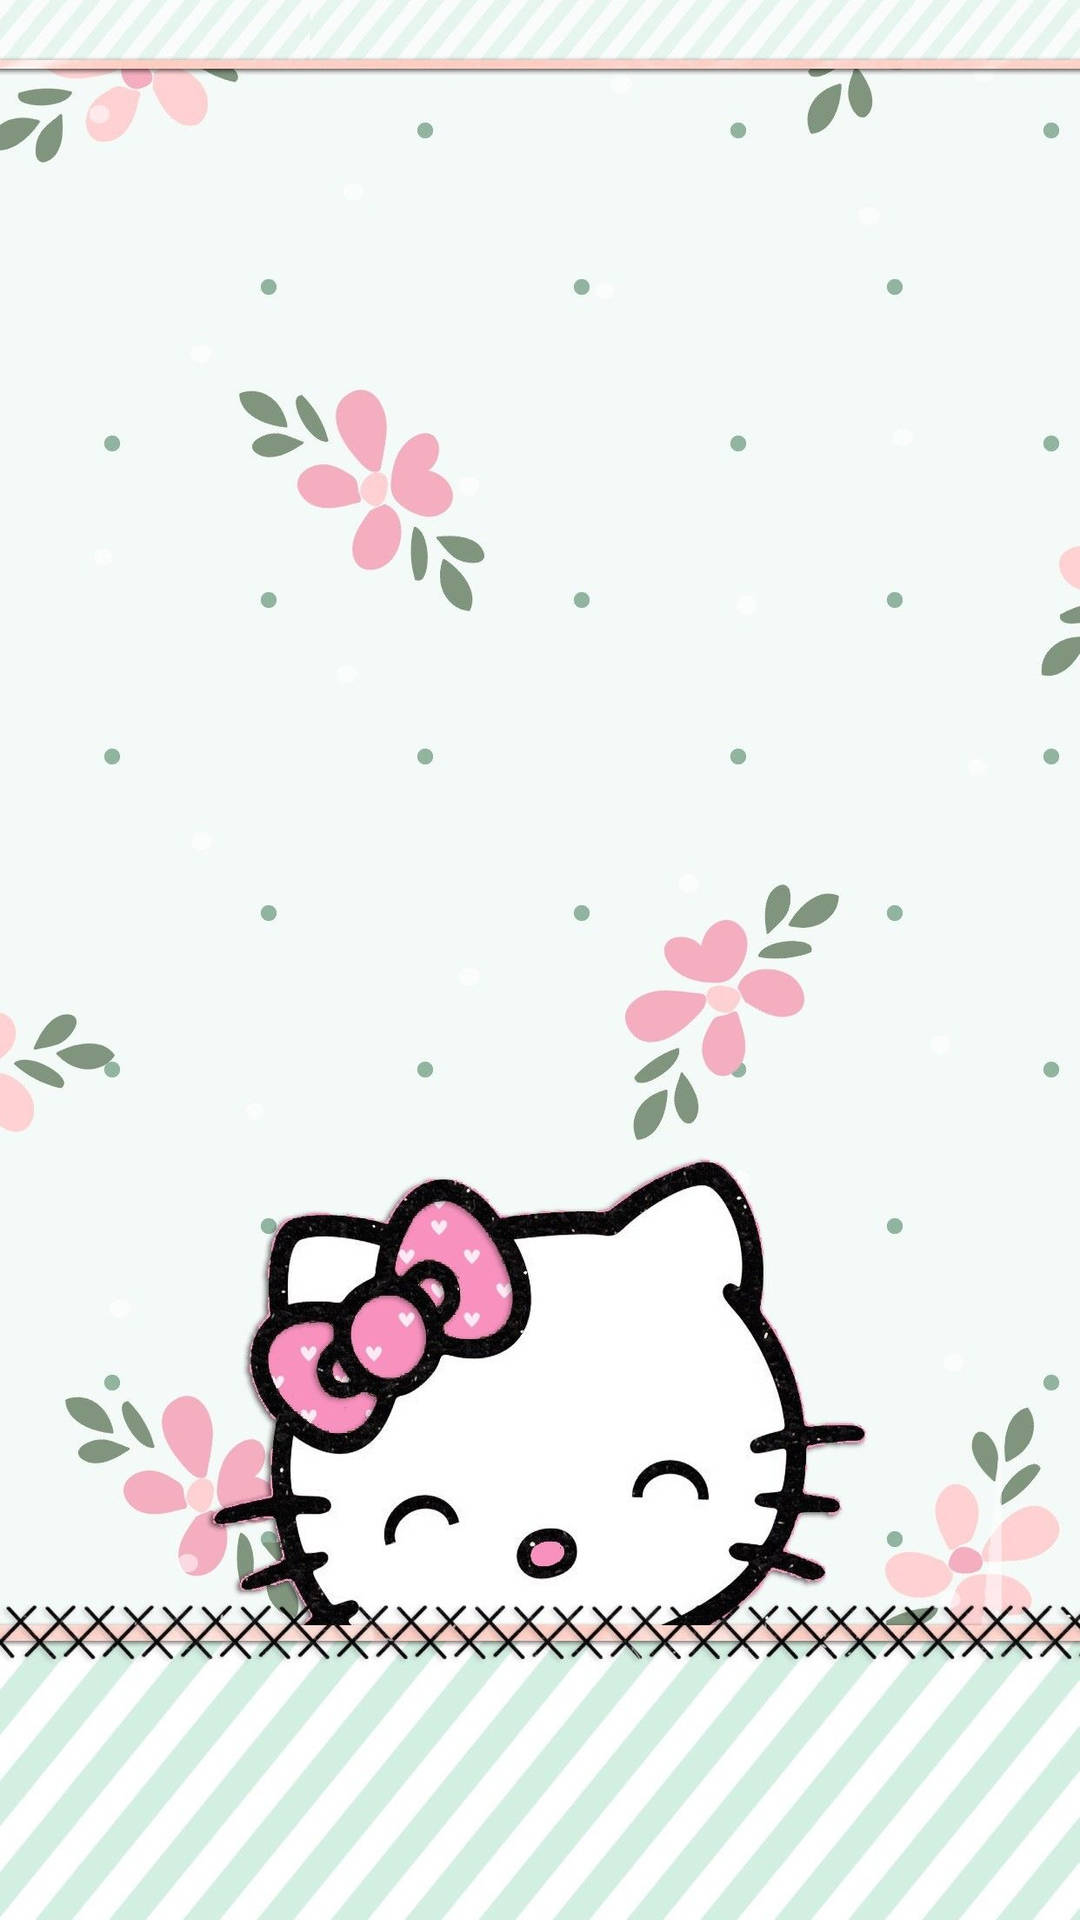 Spread a sprinkle of joy with this cheery Hello Kitty Wallpaper. Wallpaper